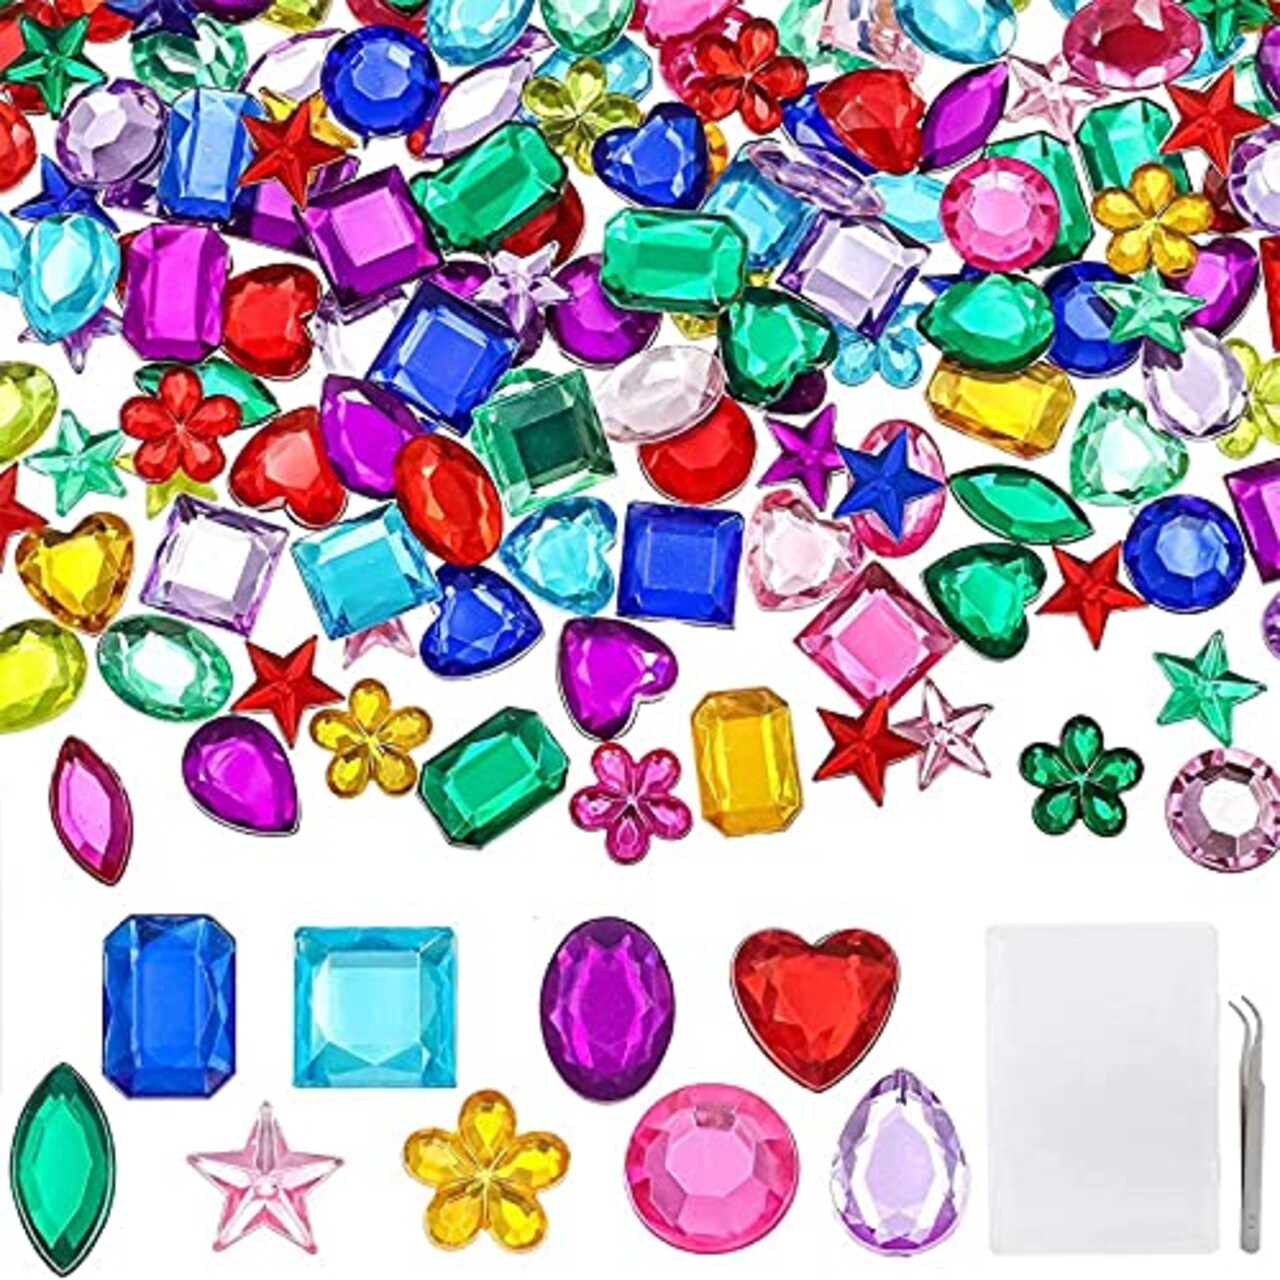 YIQIHAI 360pcs Craft Gems Jewels Acrylic Flatback Rhinestones Gemstone for  Halloween Pirate Party Table Decorations, 10-15mm，9 Shapes with Tweezers  and Storage Box